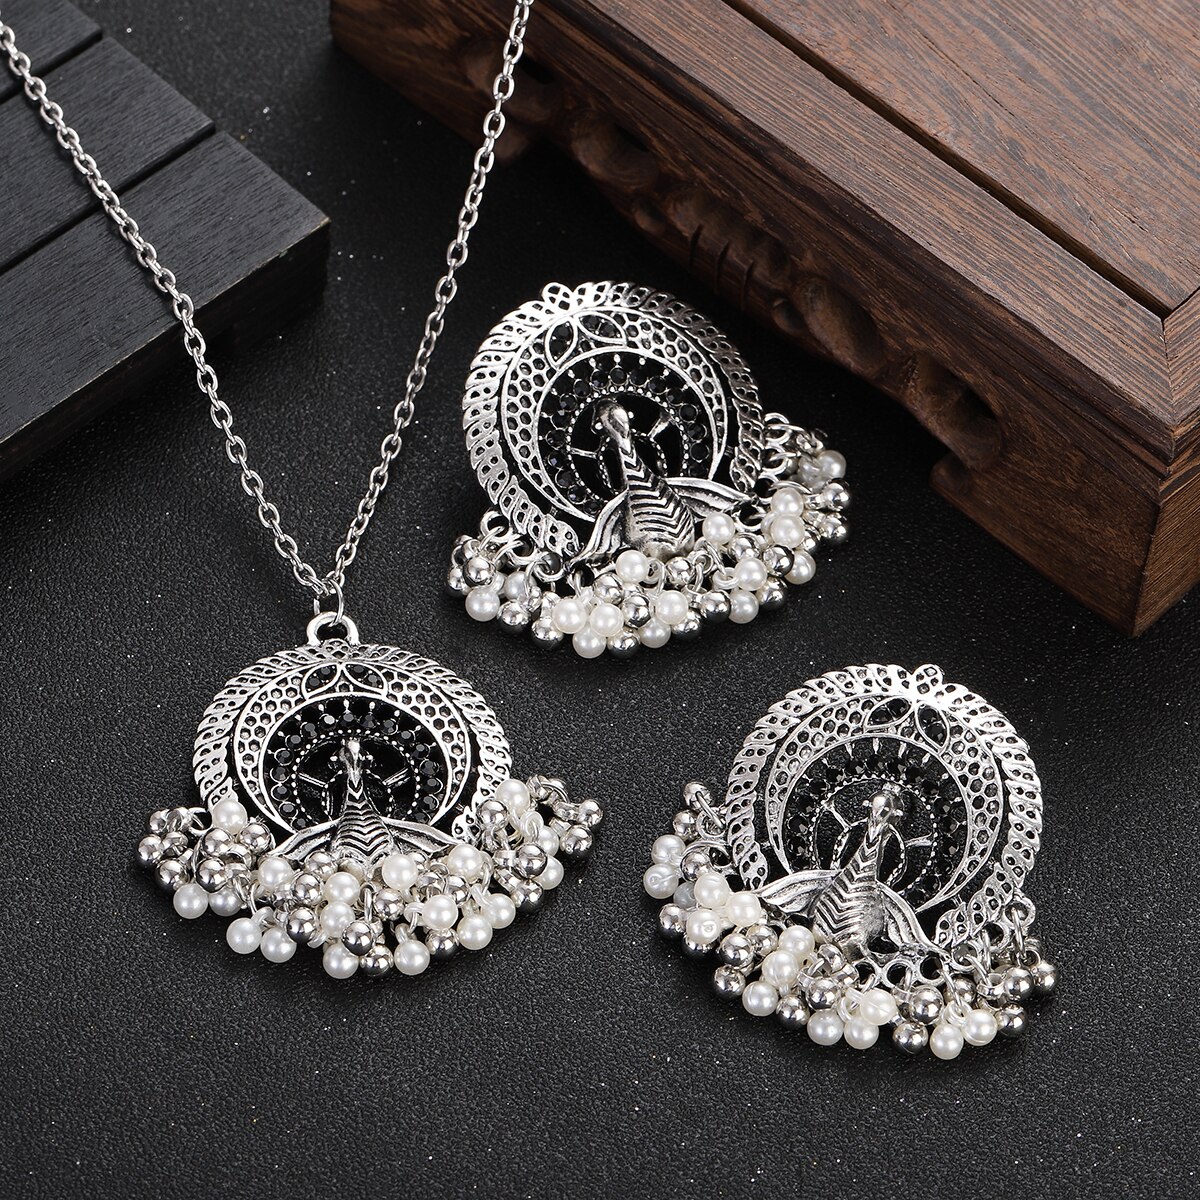 Vintage-Silver-Color-Jewelry-Sets-for-Women-Accessories-Ethnic-Geometric-Peacock-Crystal-Pendant-Nec-1005004941302824-2